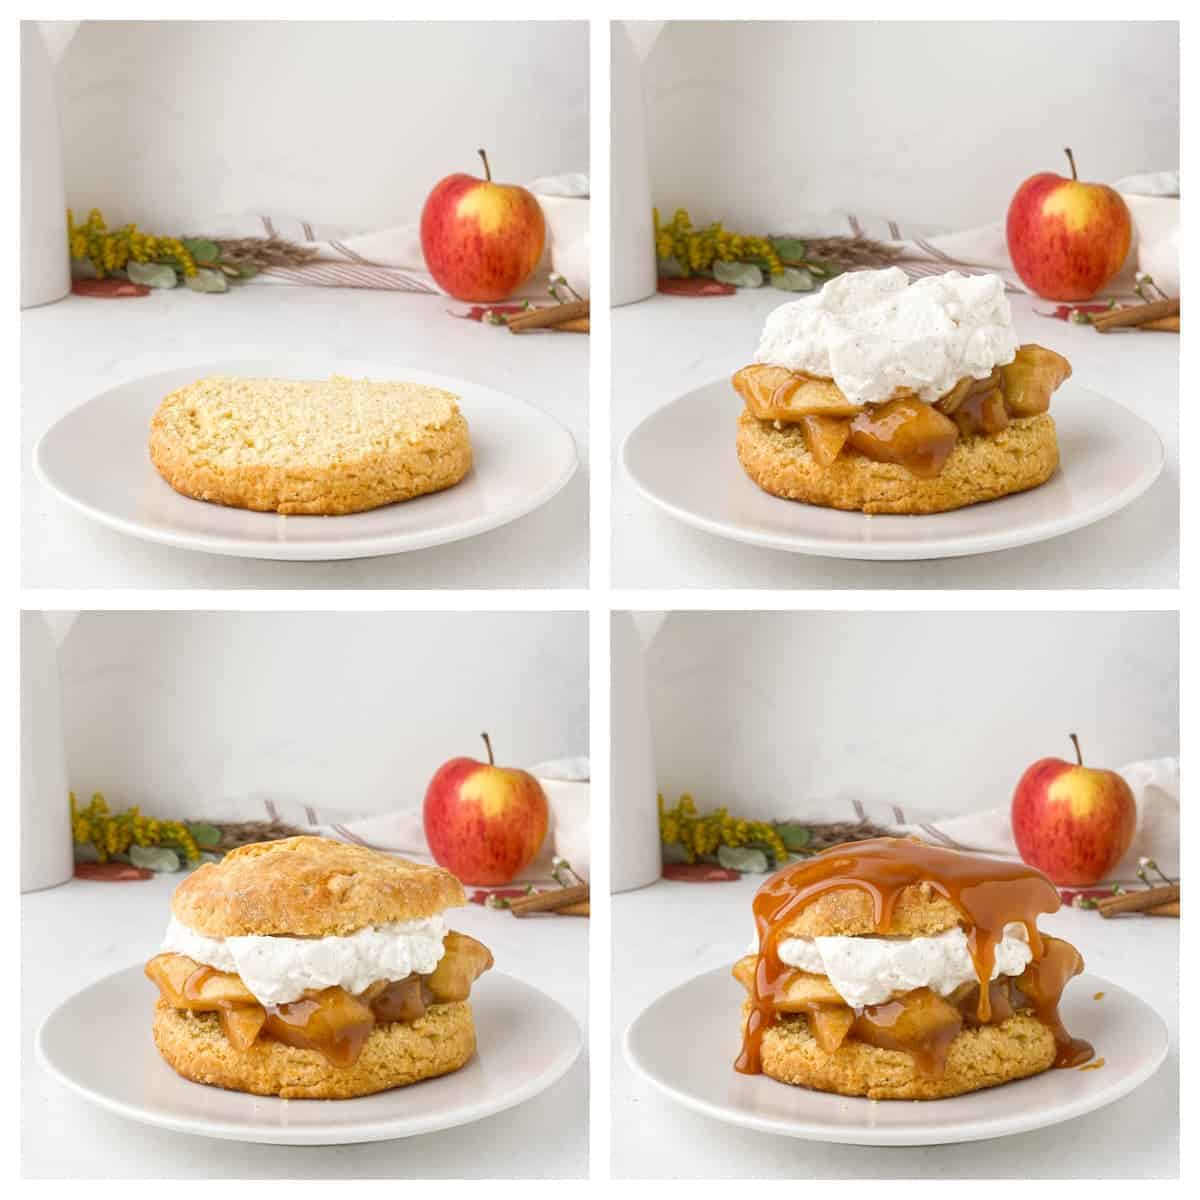 Collage of images of Caramel Apple Shortcake being assembled, showing layers of cornmeal biscuit, baked apples, whipped cream, and caramel sauce